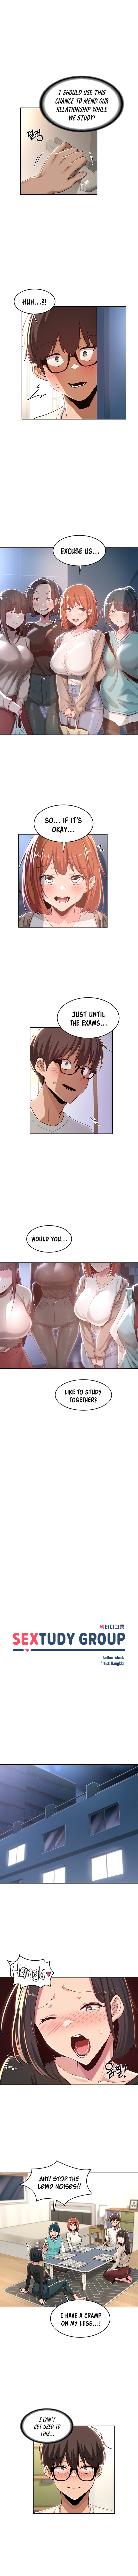 Panel Image 1 for chapter 43 of manhwa Sex Study Group on read.oppai.stream